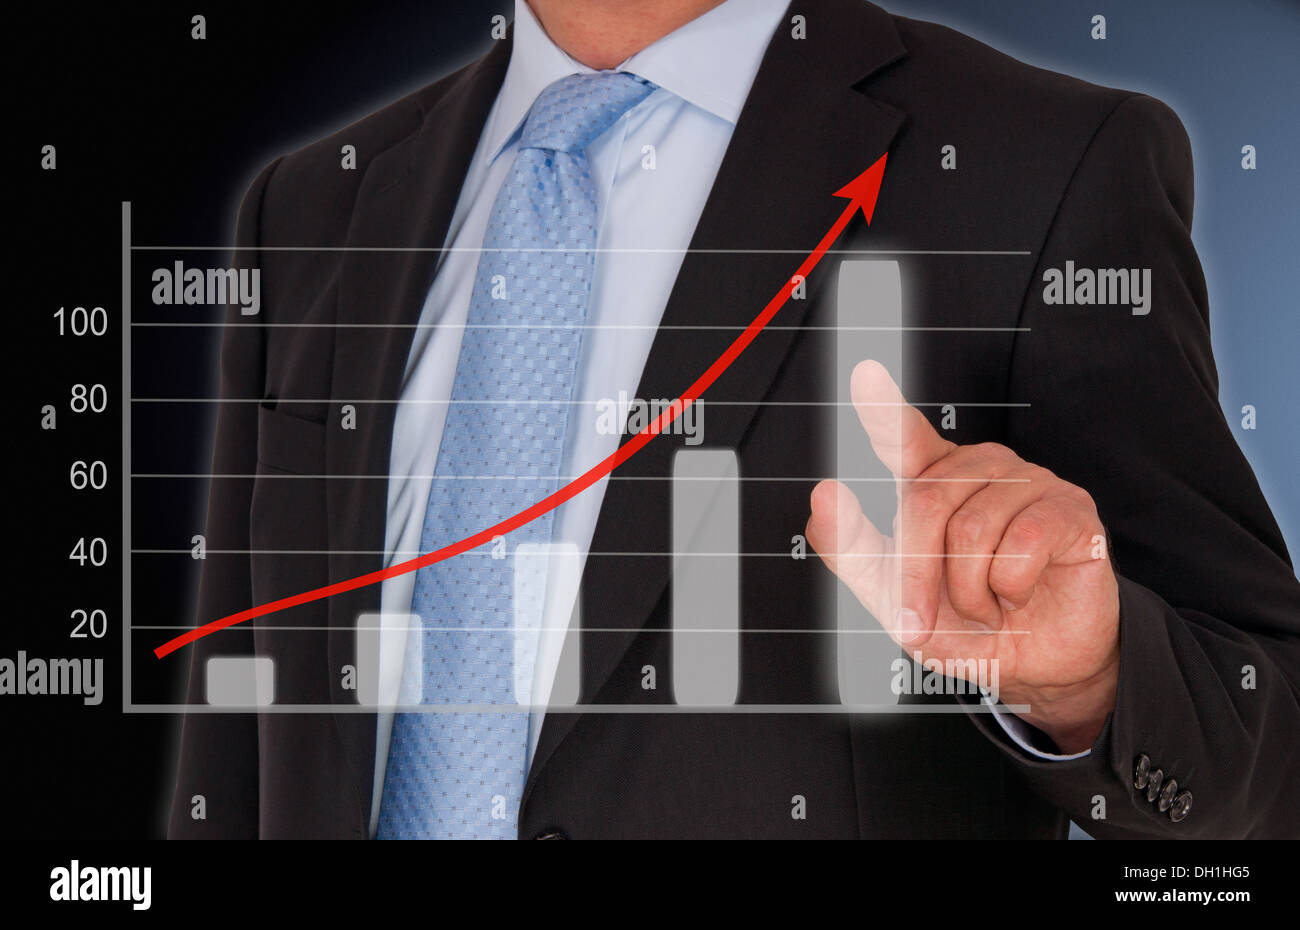 Business Sales Stock Photo